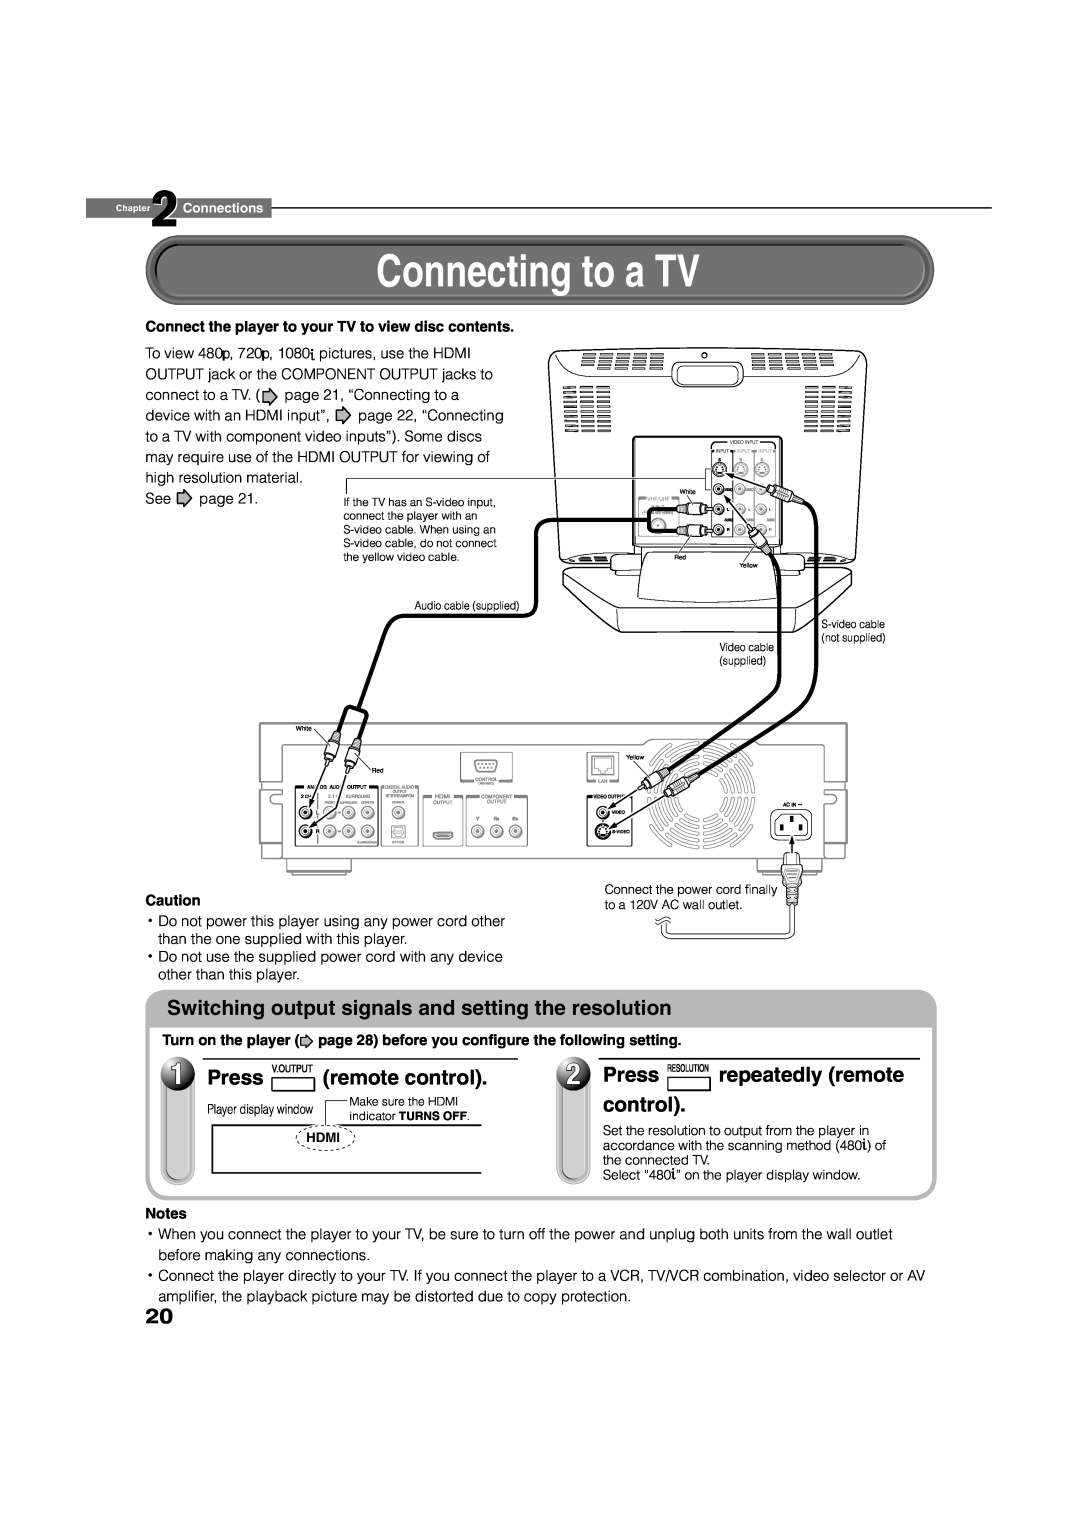 Toshiba HD-XA1, hd-xa1kn Connecting to a TV, Switching output signals and setting the resolution, Press, remote control 